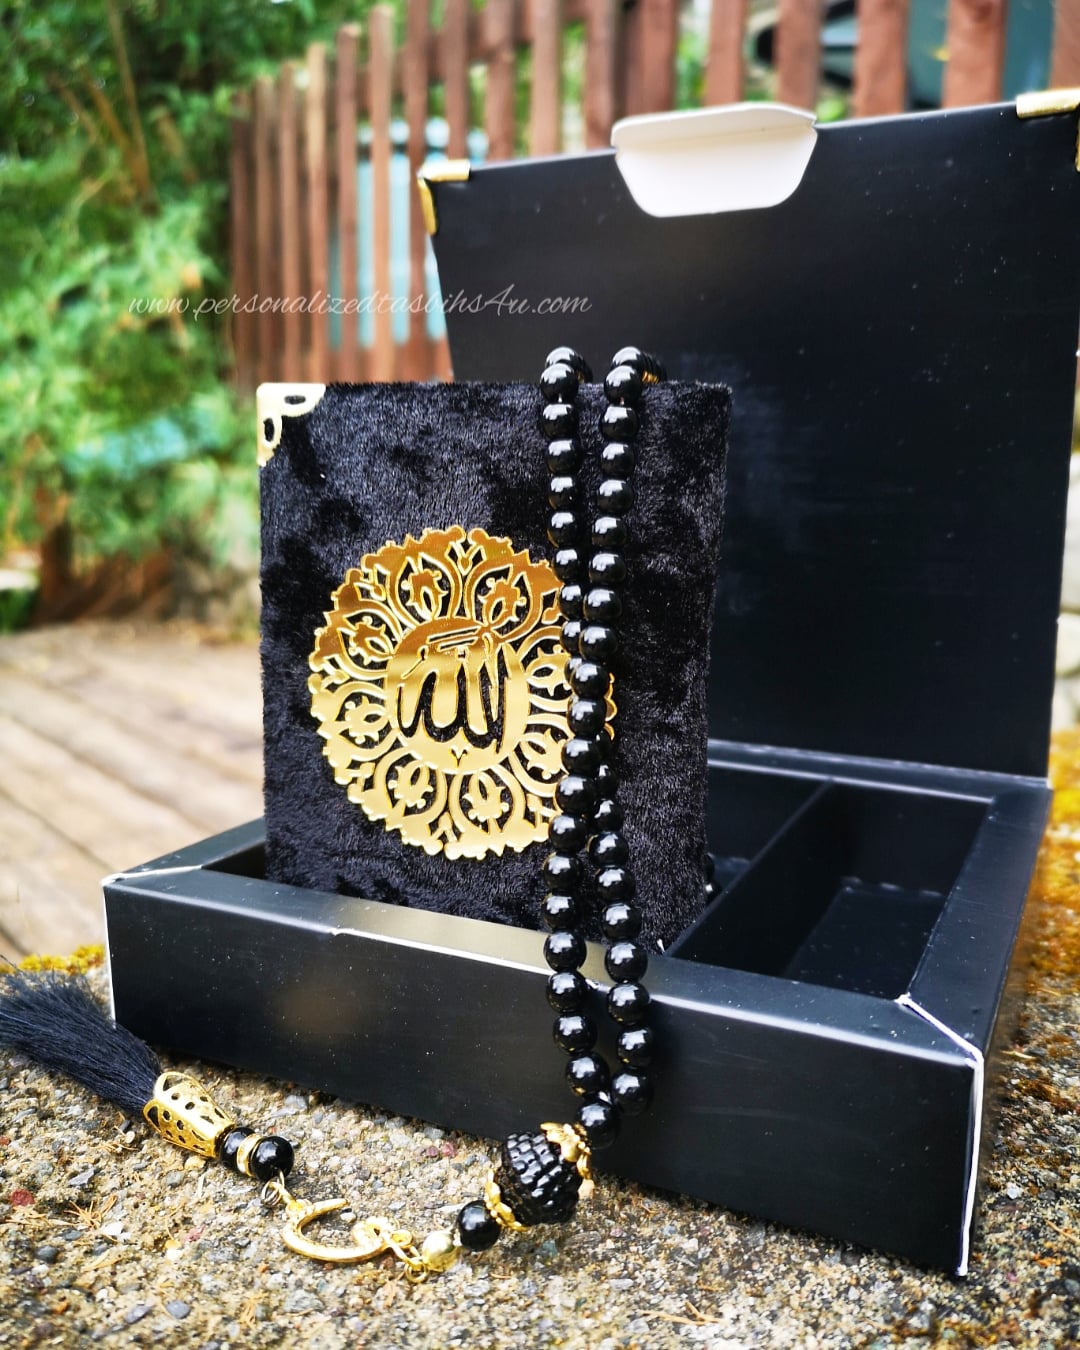 [REDUCED!]Quran and Tasbih Set - Choose your Colour!